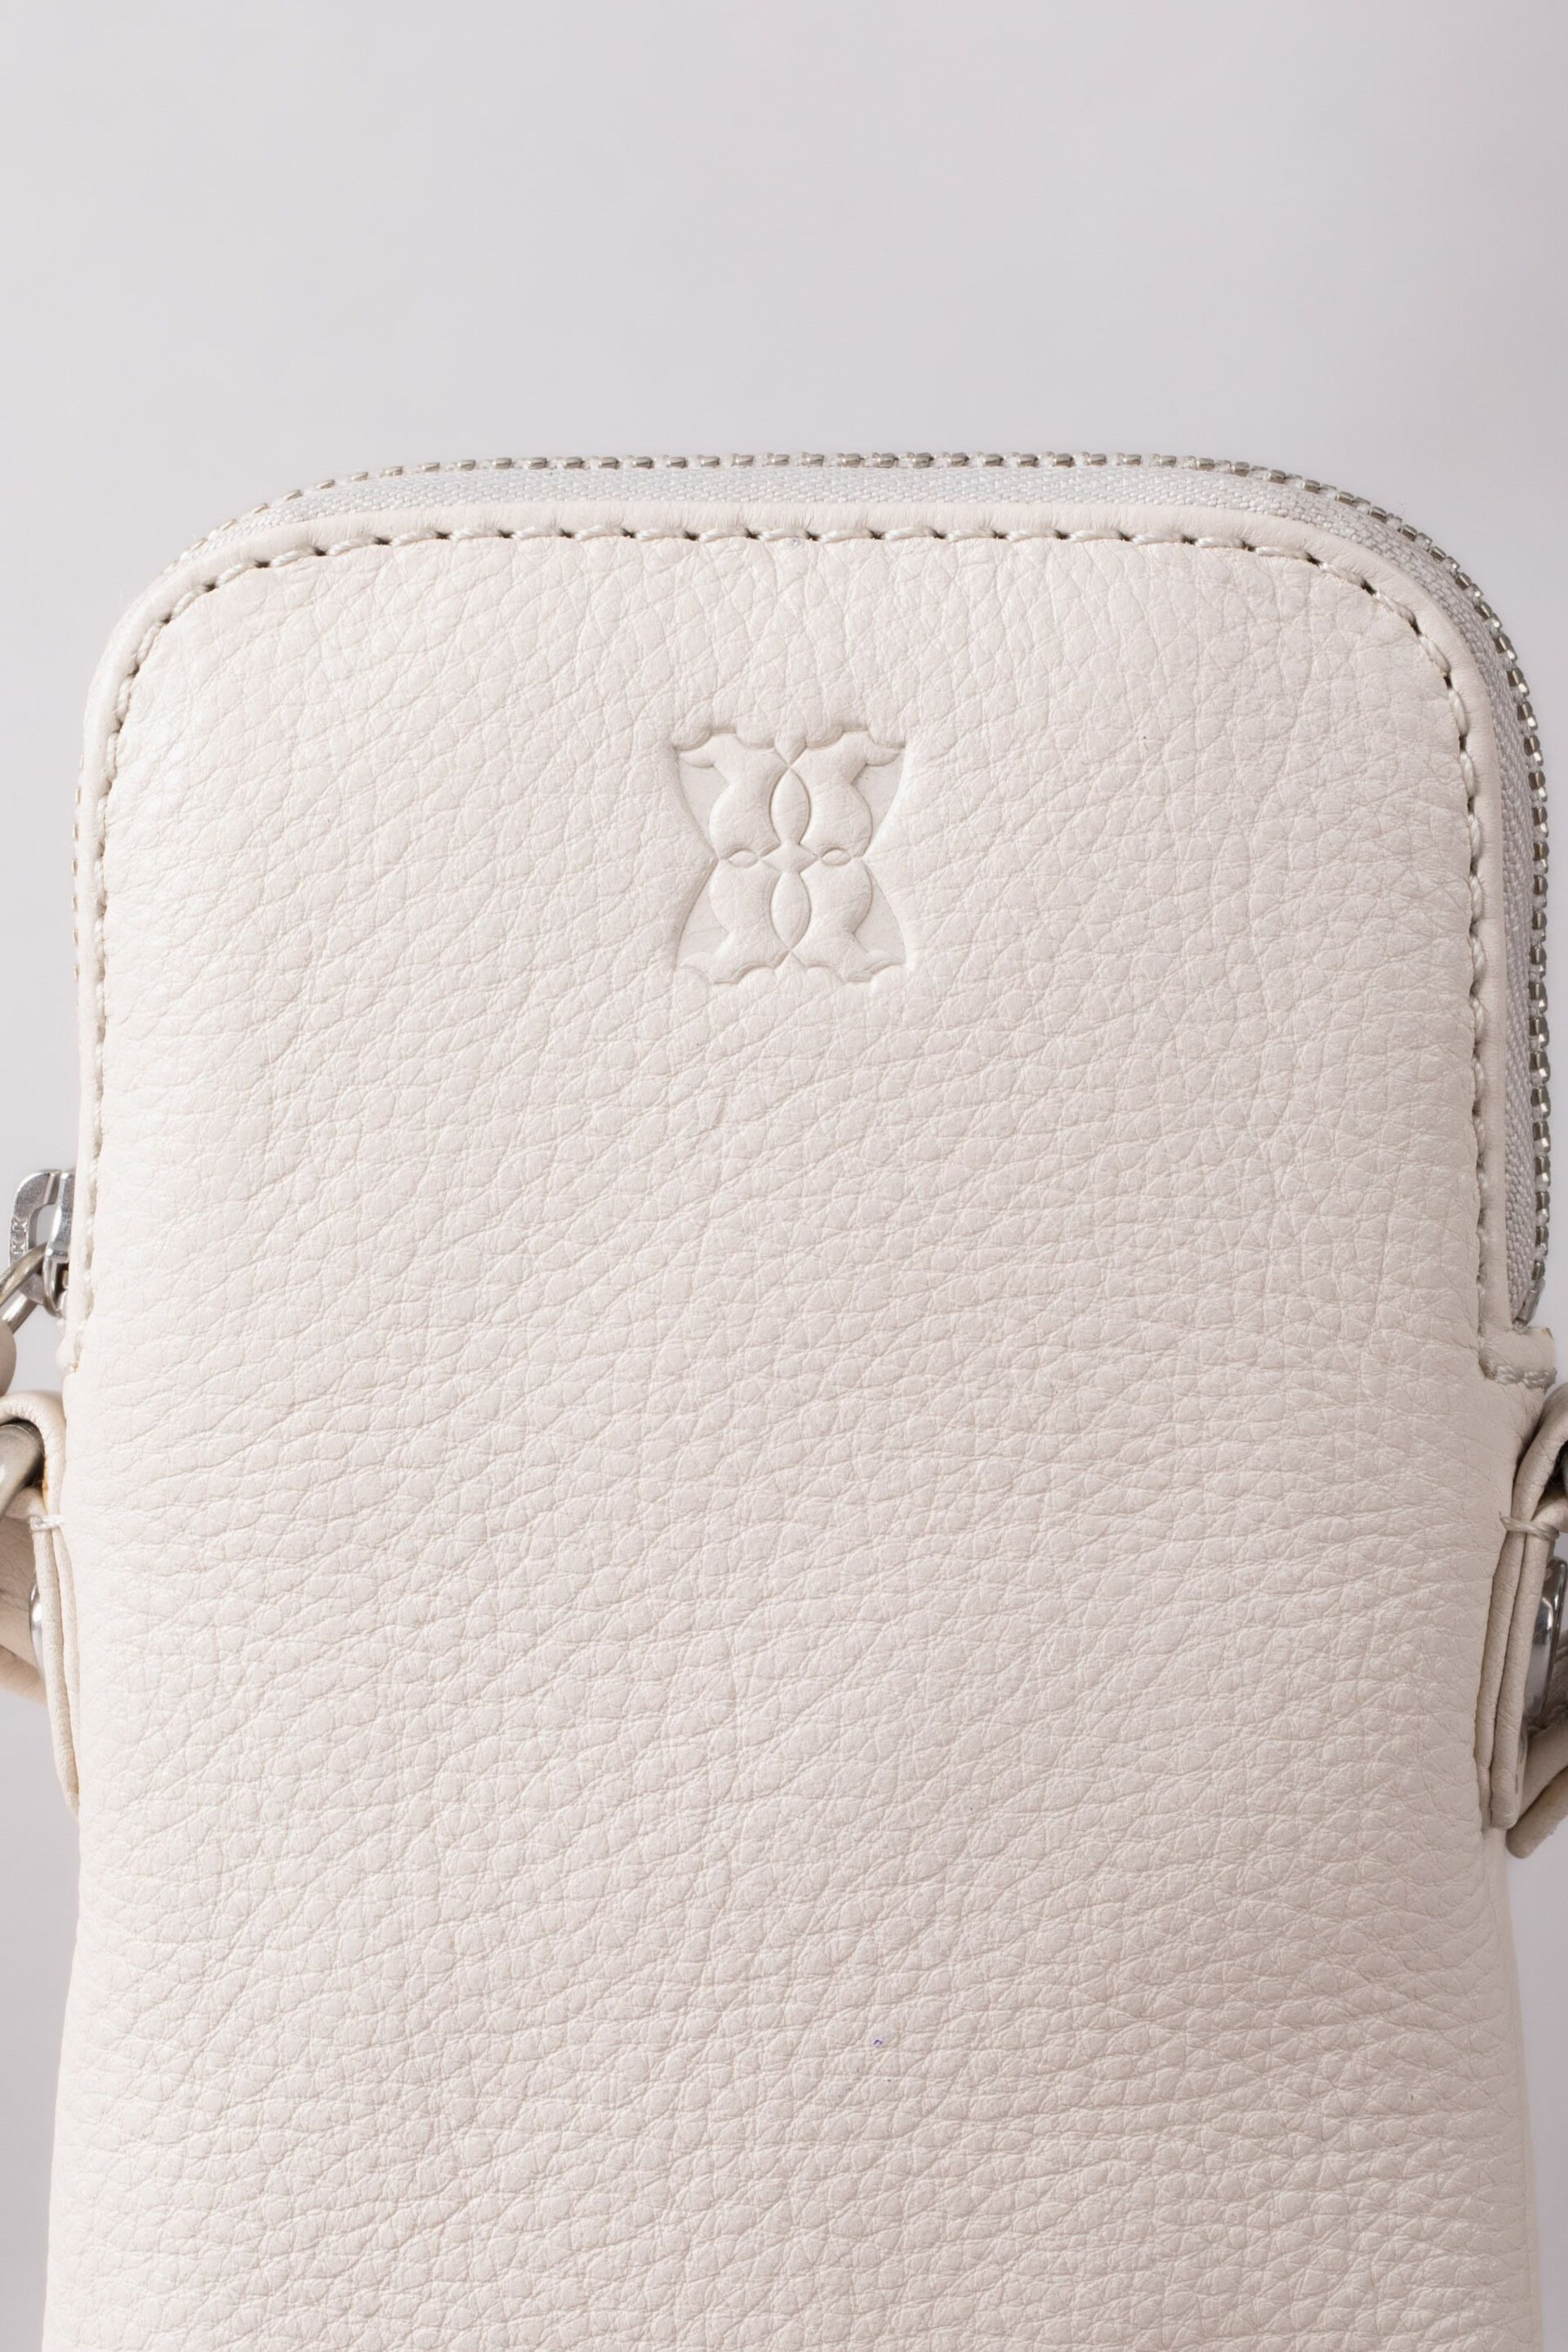 Lakeland Leather White Coniston Leather Cross-Body Phone Pouch - Image 4 of 6